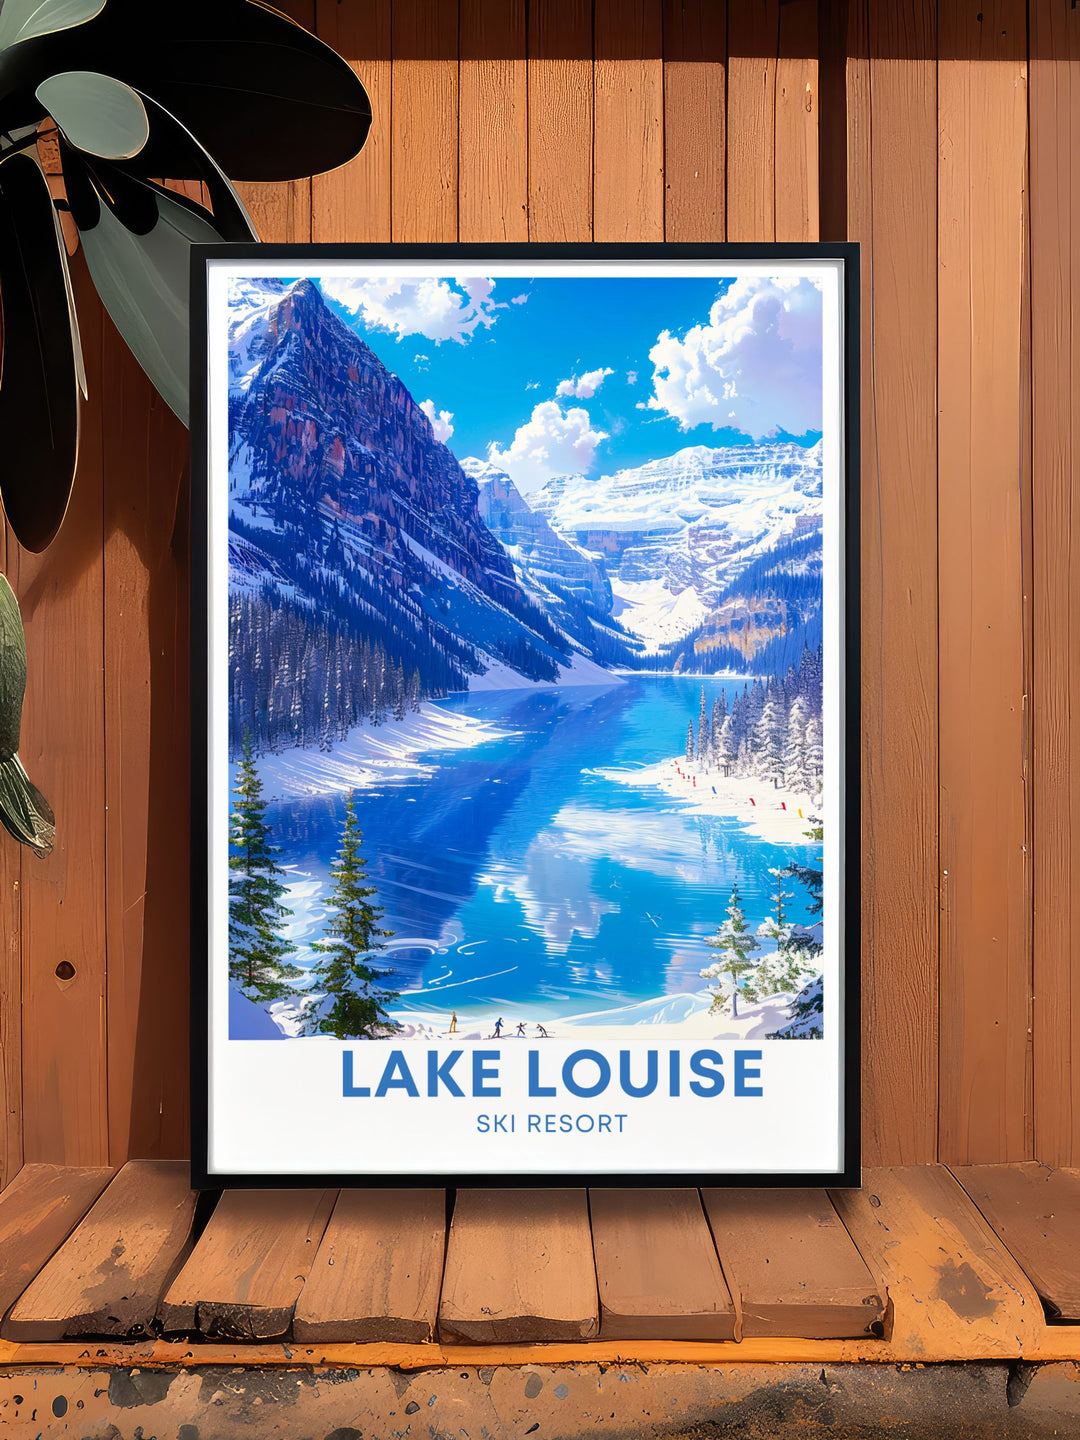 An illustration of Lake Louise in winter, with its serene turquoise waters and snow covered surroundings, perfect for adding a touch of Canadian wilderness to your decor.